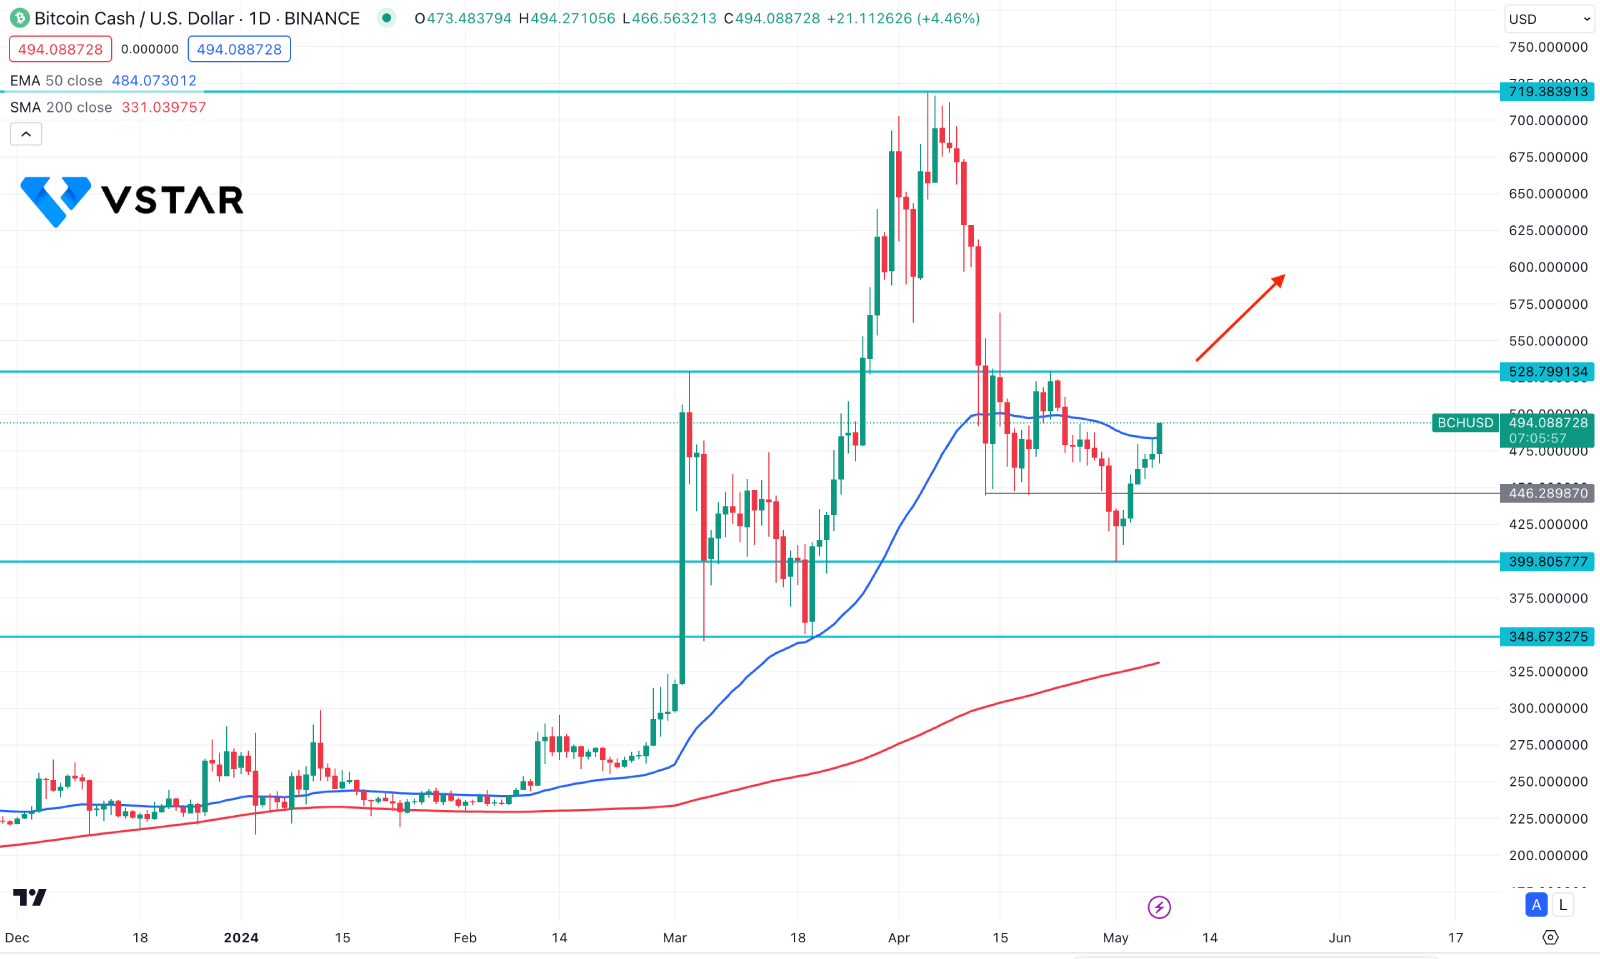 Is Bitcoin Cash (BCHUSD) A Buy After The Possible Cardano Integration?